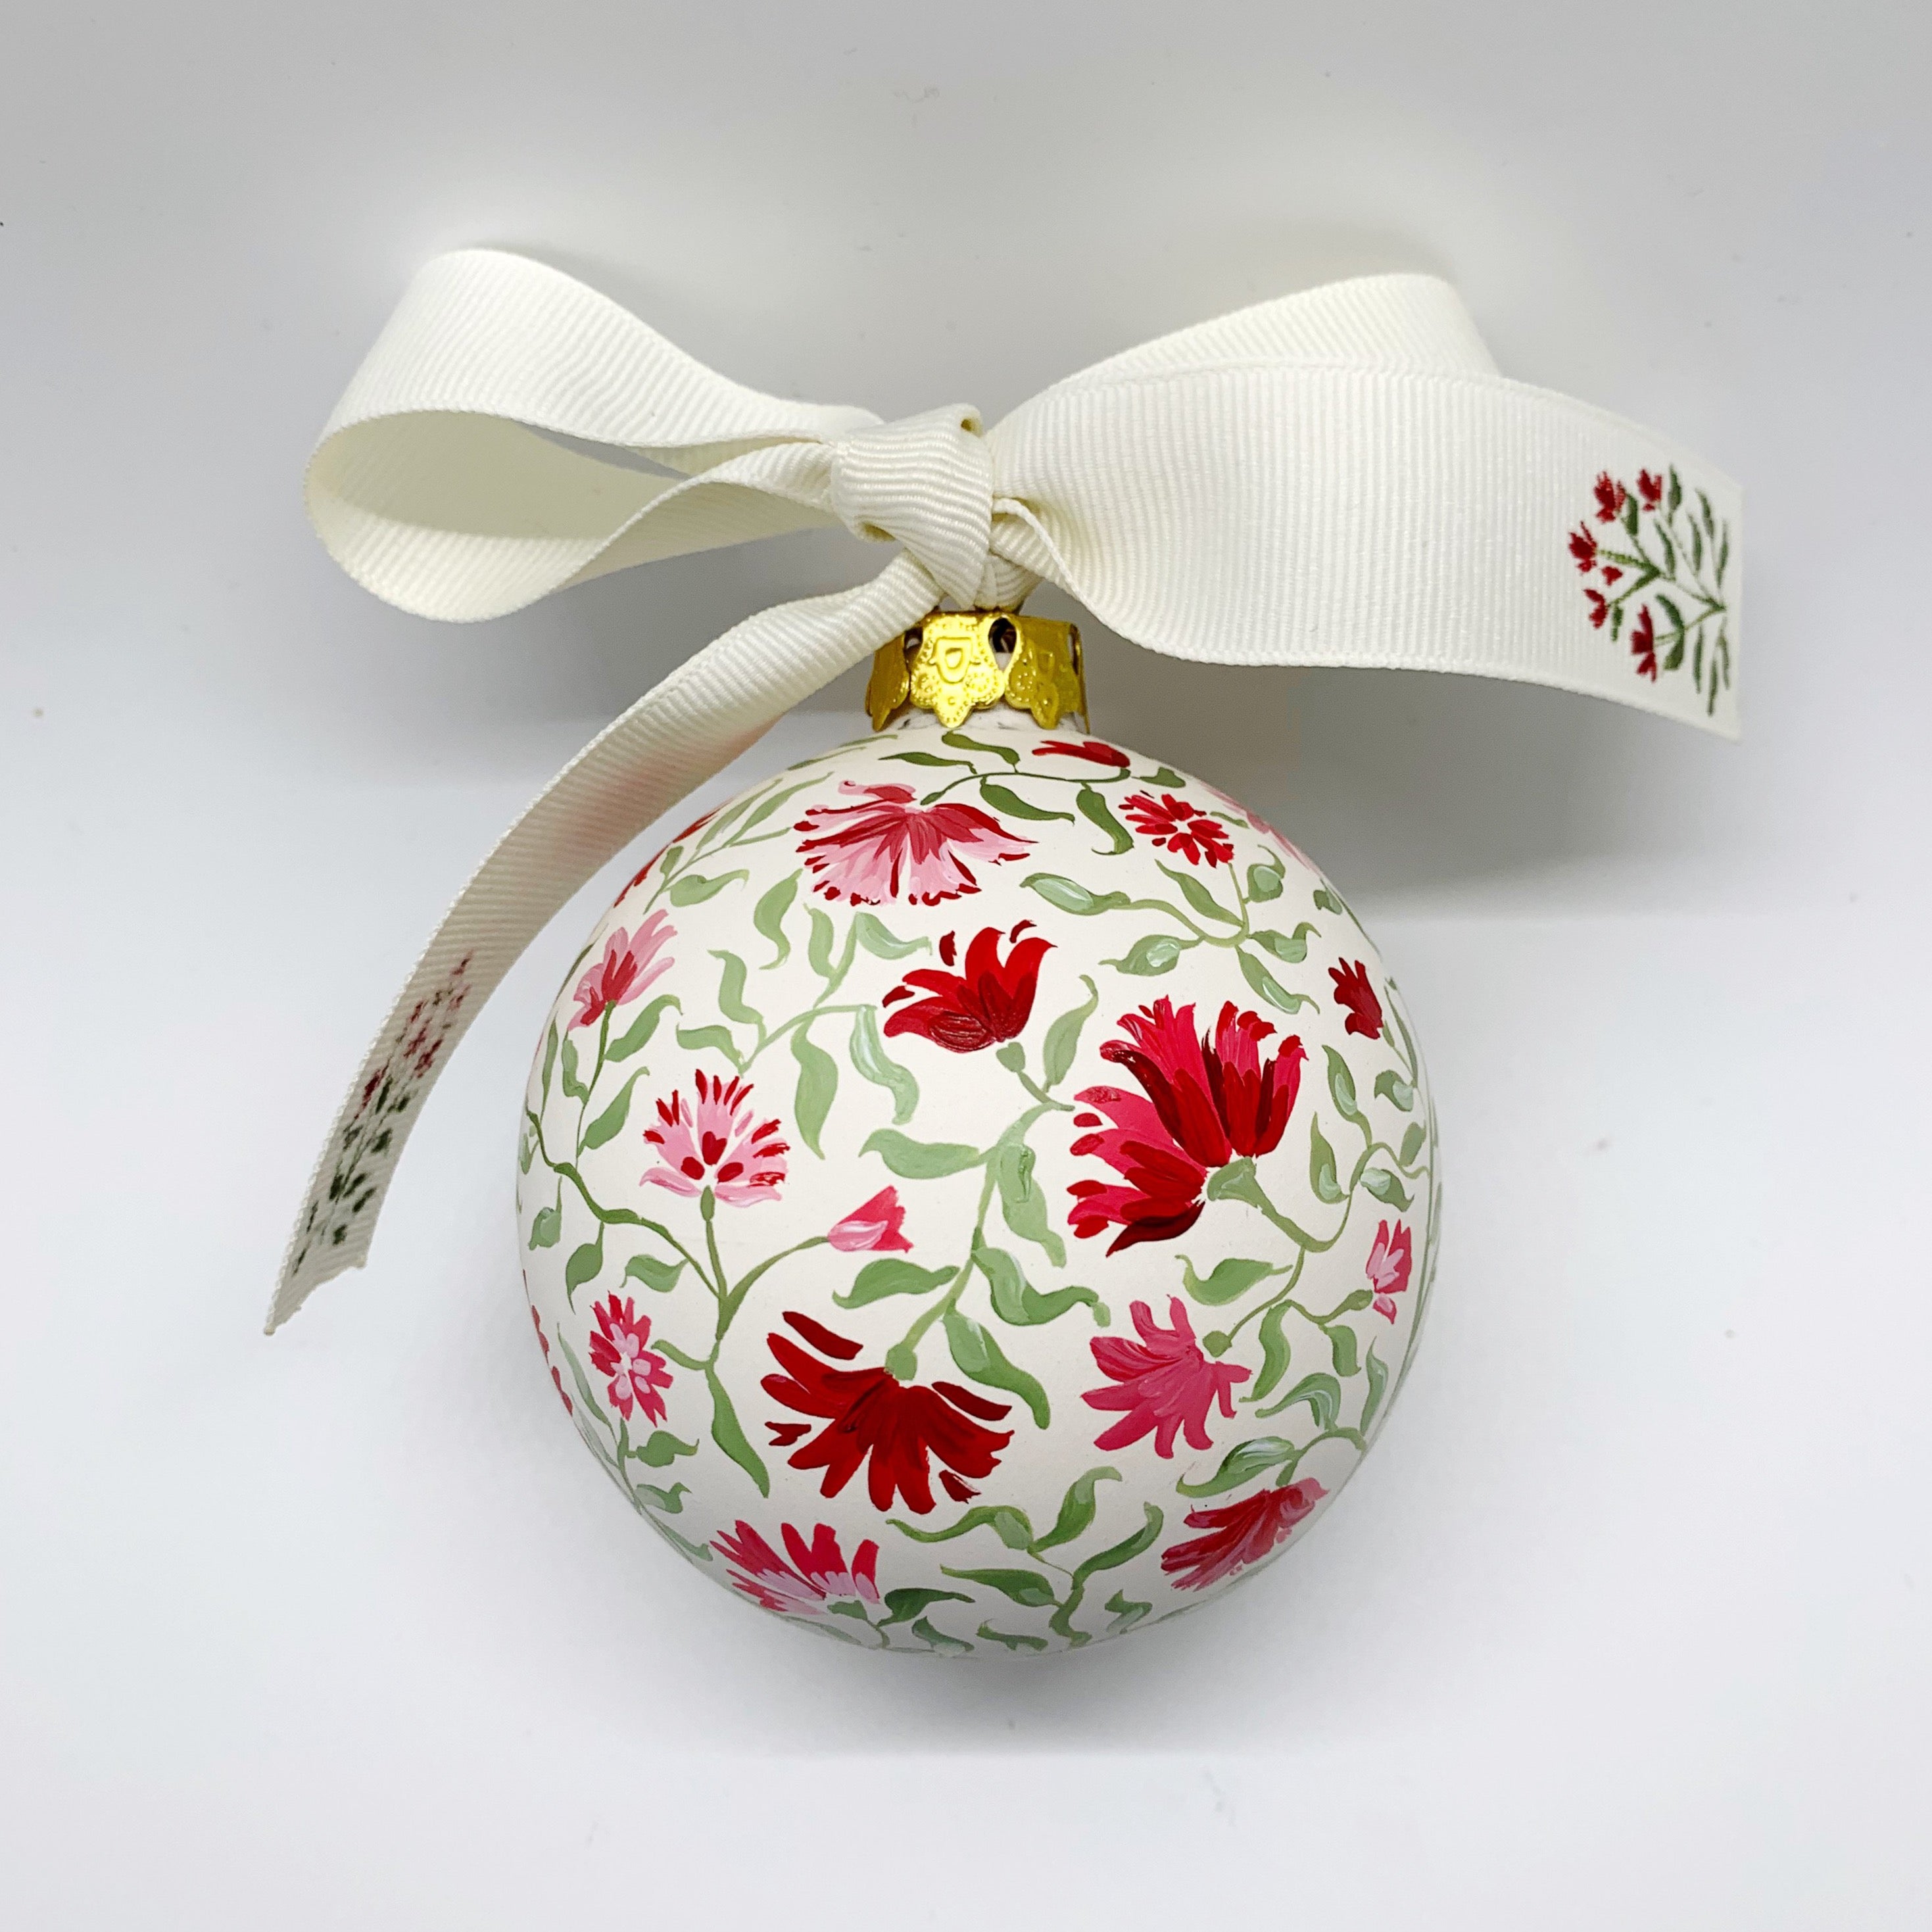 Hand Painted Floral Ornament, Floral Ornament, Black Christmas Ornaments,  Hand Painted Ornaments, Painted Christmas Ornaments, Florals 